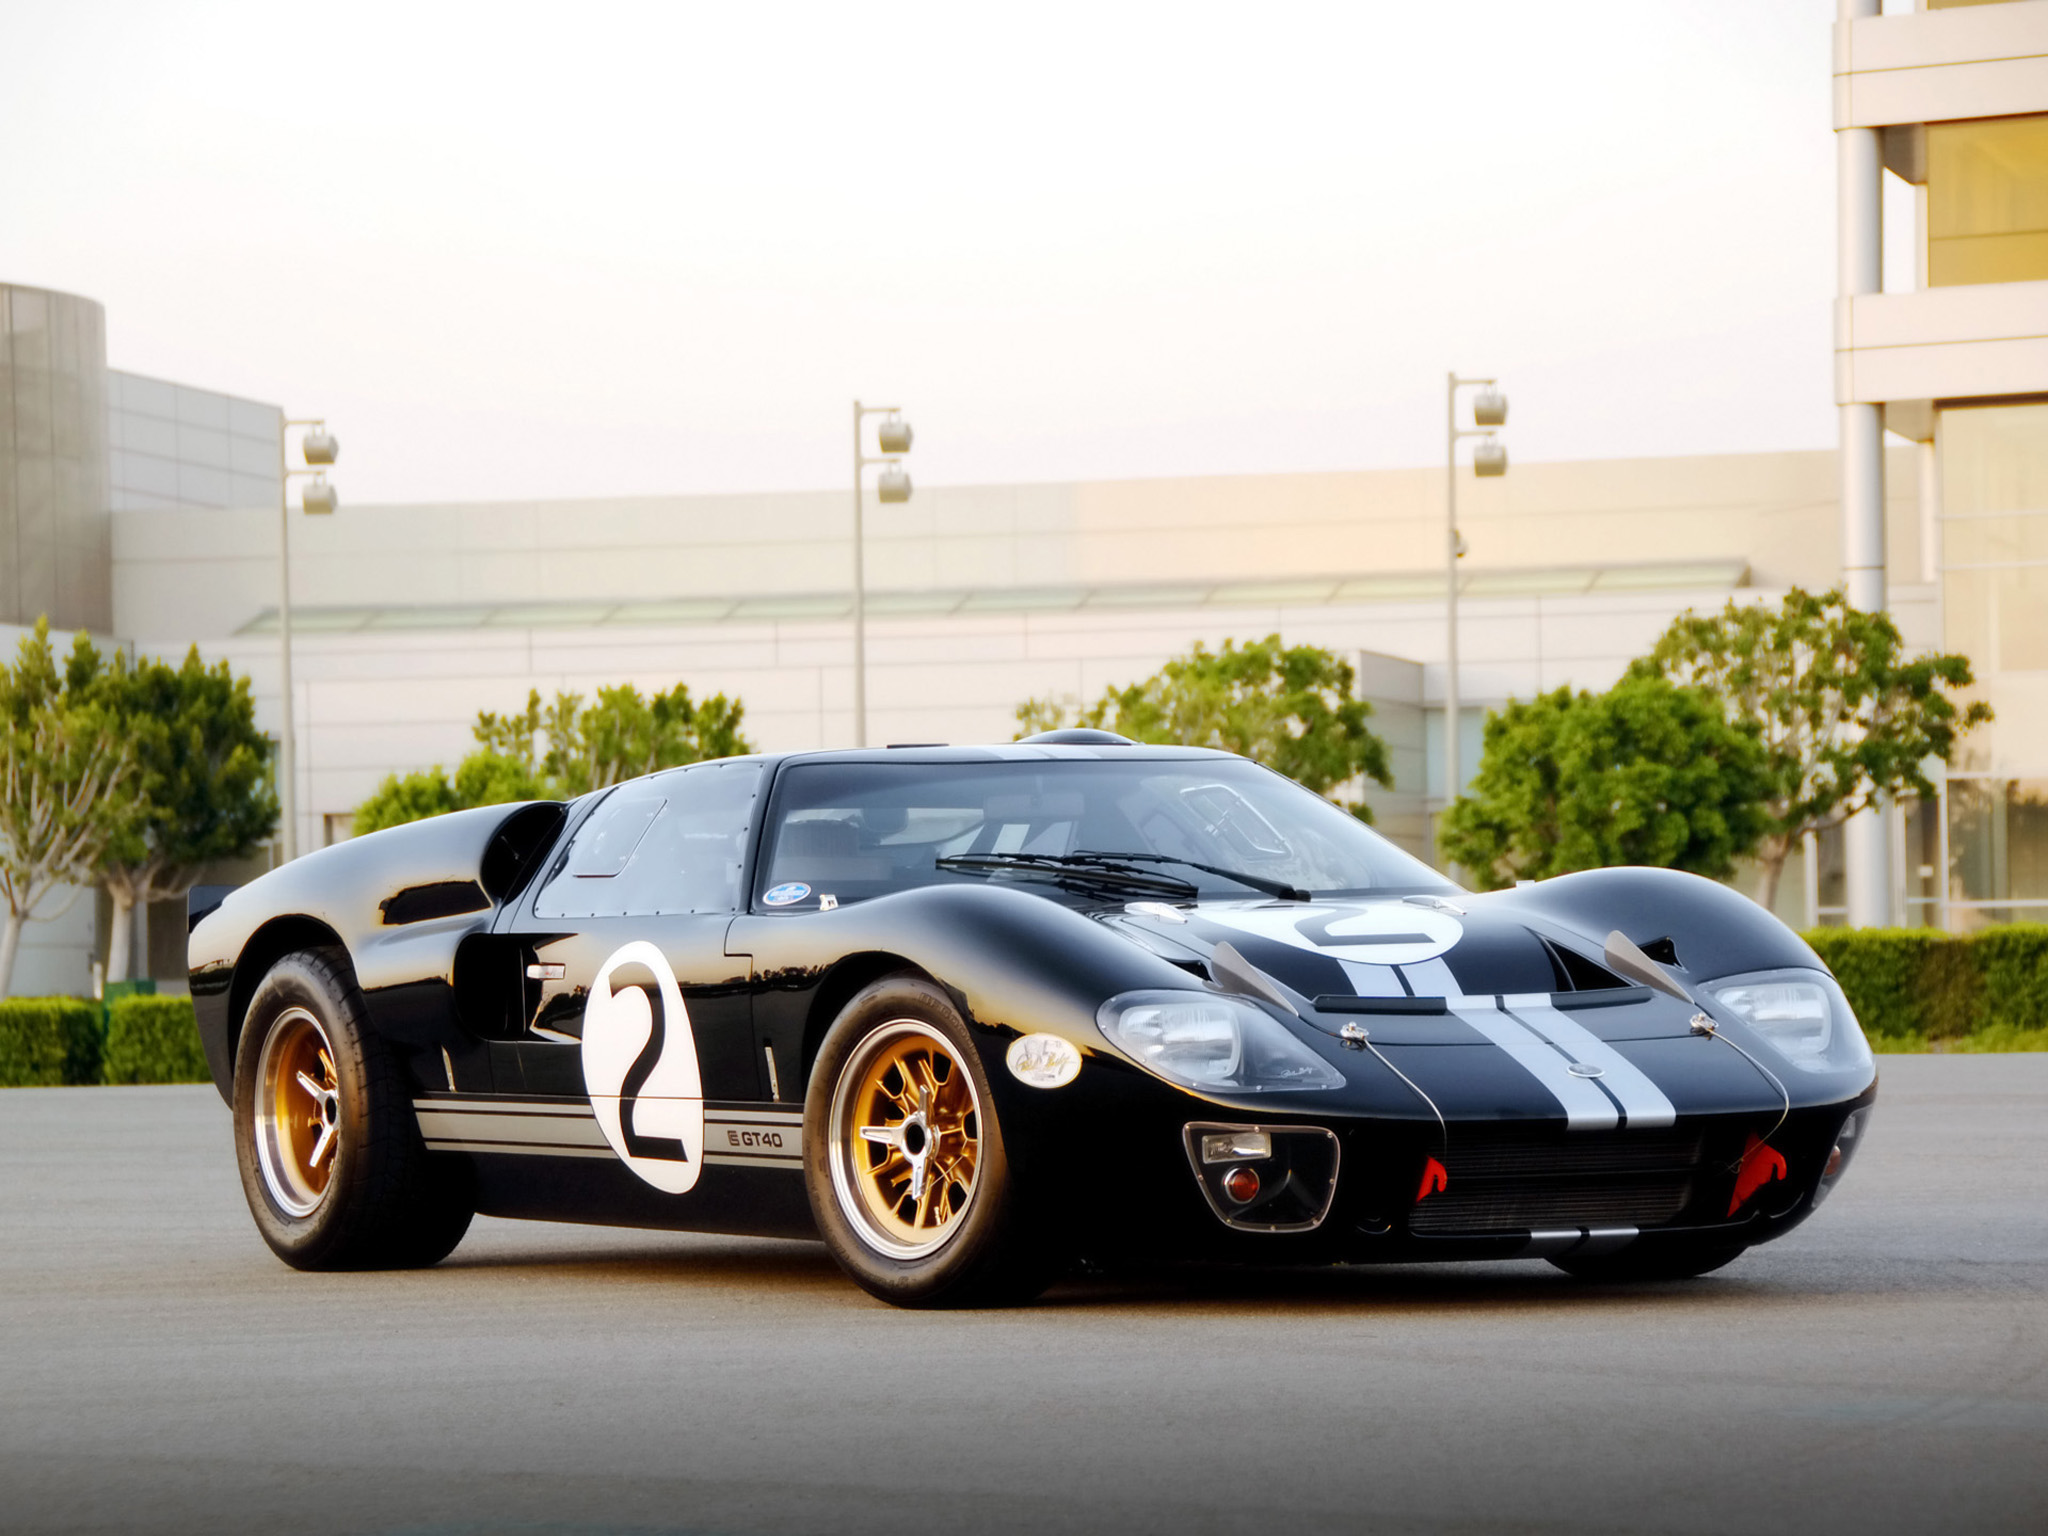 2008, Shelby, Mkii, Gt40, Supercar, Supercars, Race, Racing Wallpaper